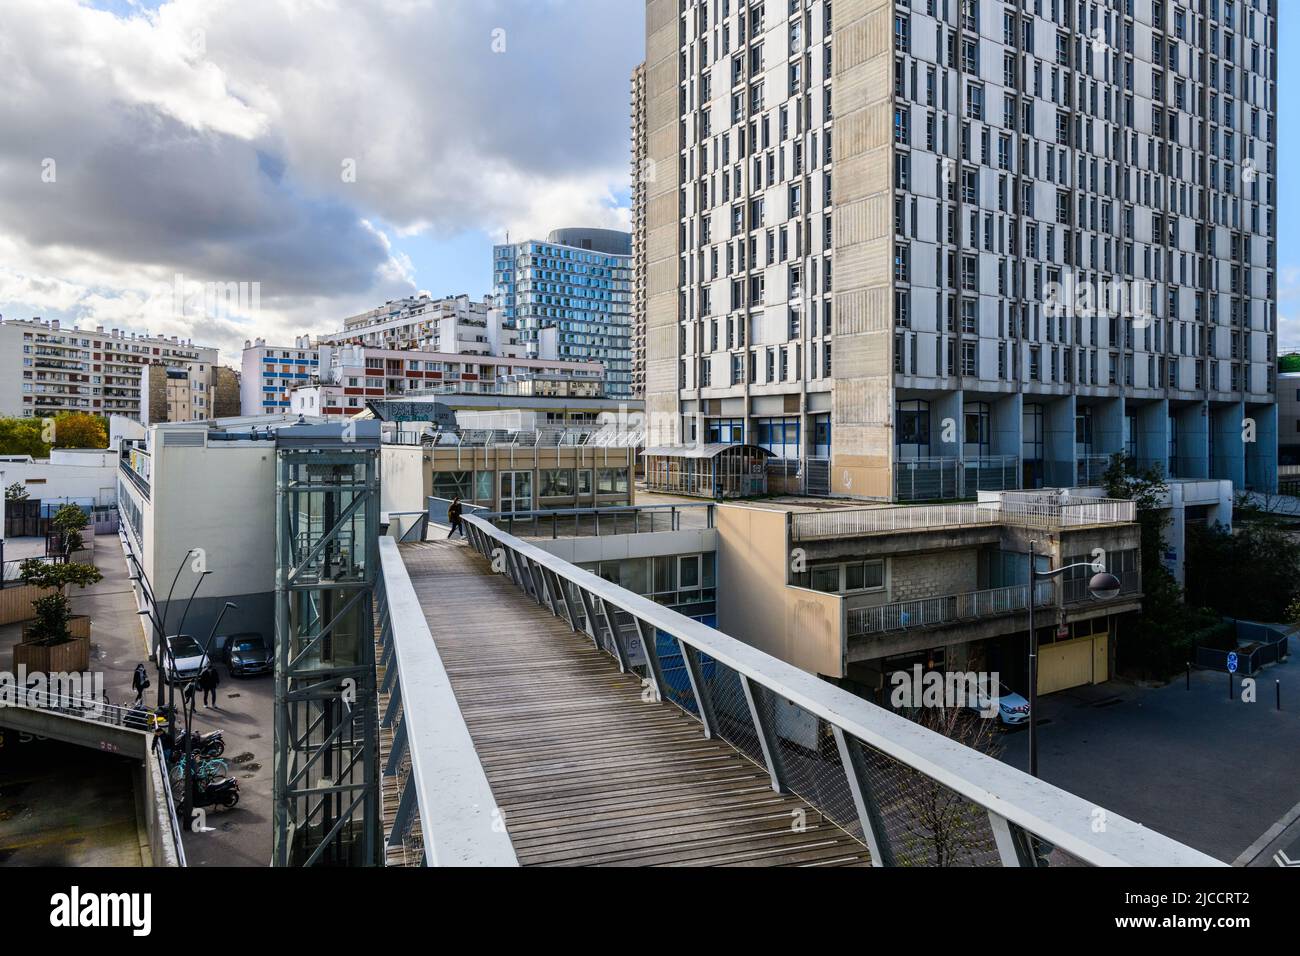 France, Paris, 2020-10-26. View of a part of the Beaugrenelle district from a slab. The tower in the foreground is the Keller tower, built in 1975. Stock Photo